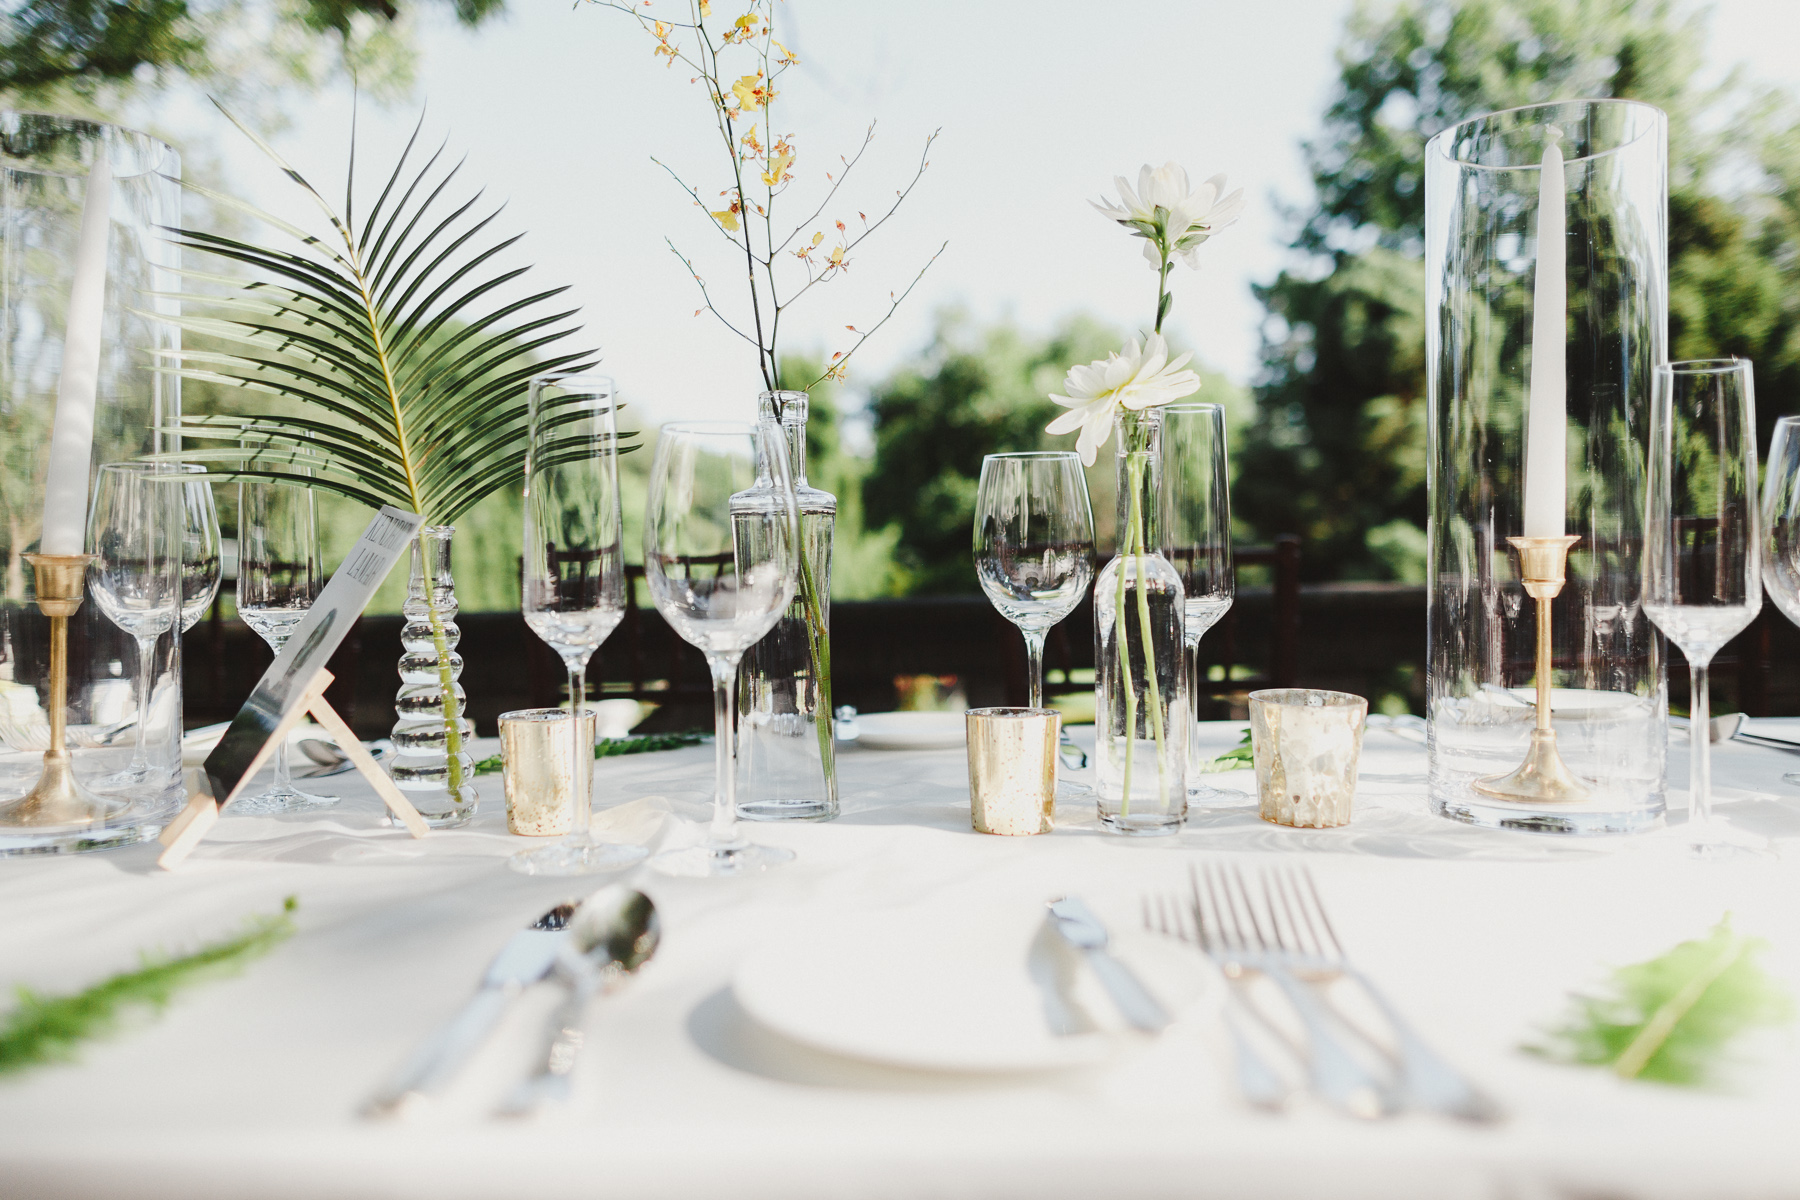 What You Should Know About Garden Weddings - Outdoor Wedding Tips - by Toronto Wedding Photographer